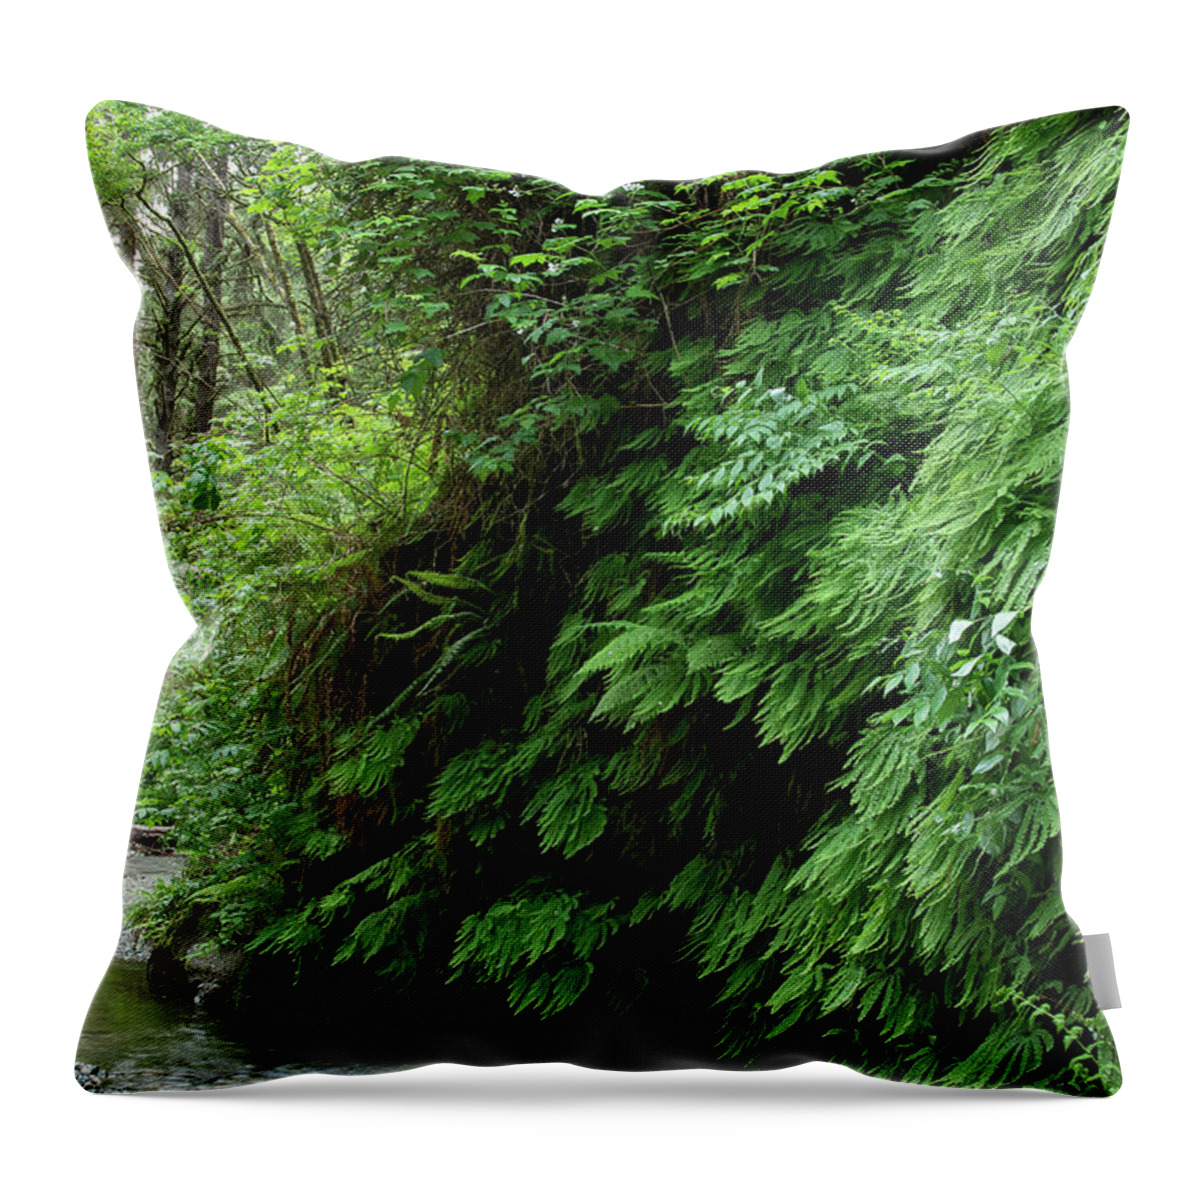 Fern Grove Throw Pillow featuring the photograph 2 Fern Grove, Redwoods N. California by Phyllis Spoor